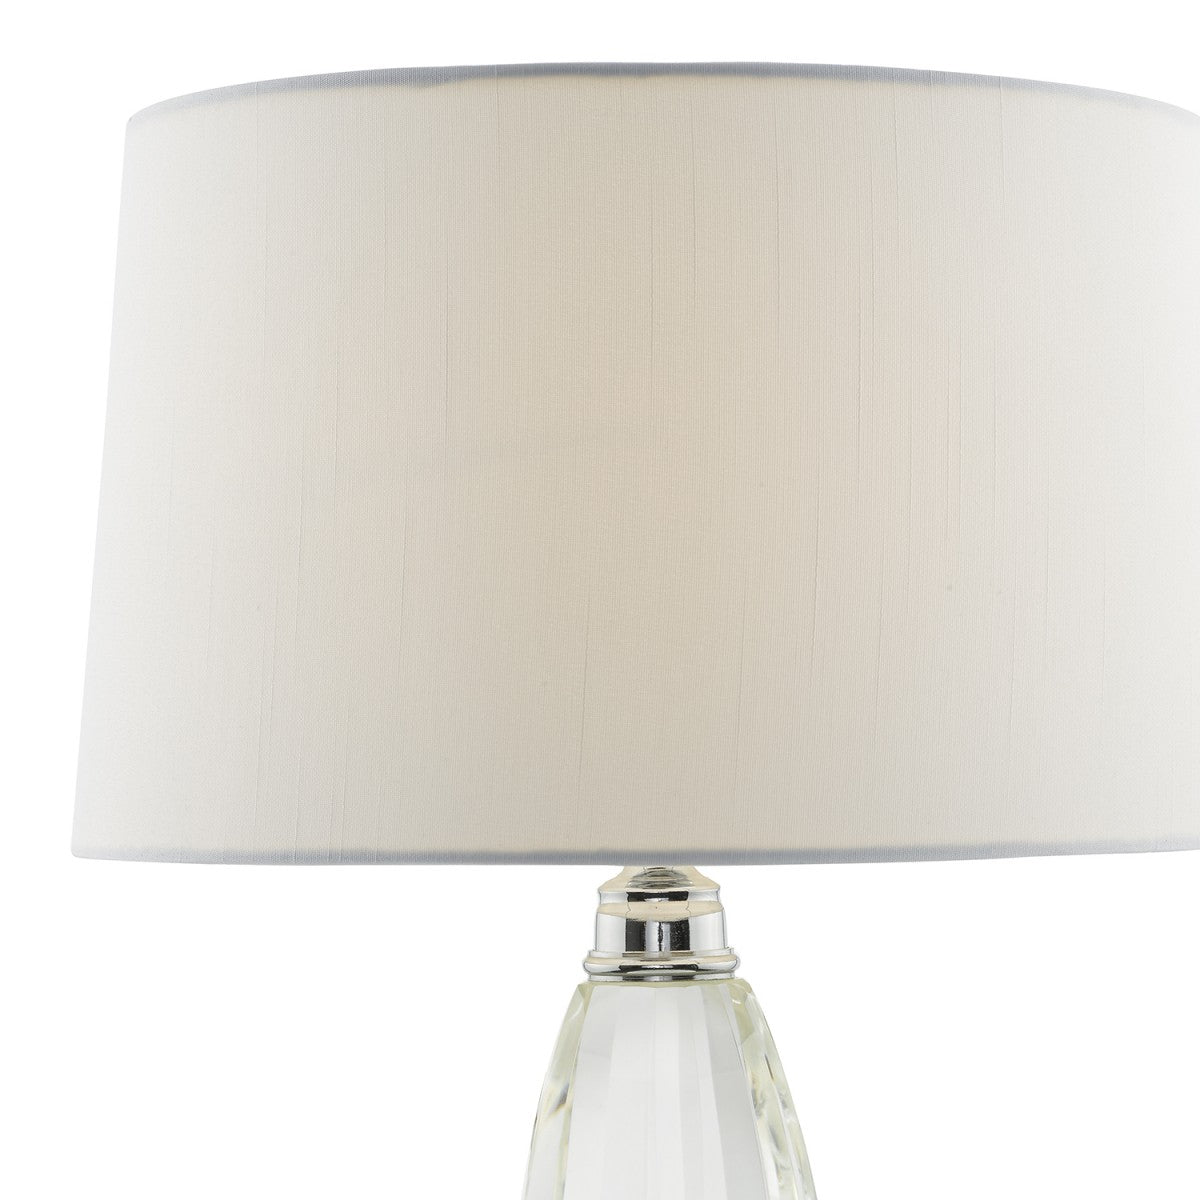 Clear Crystal Table Lamp - The Nancy Smillie Shop - Art, Jewellery & Designer Gifts Glasgow